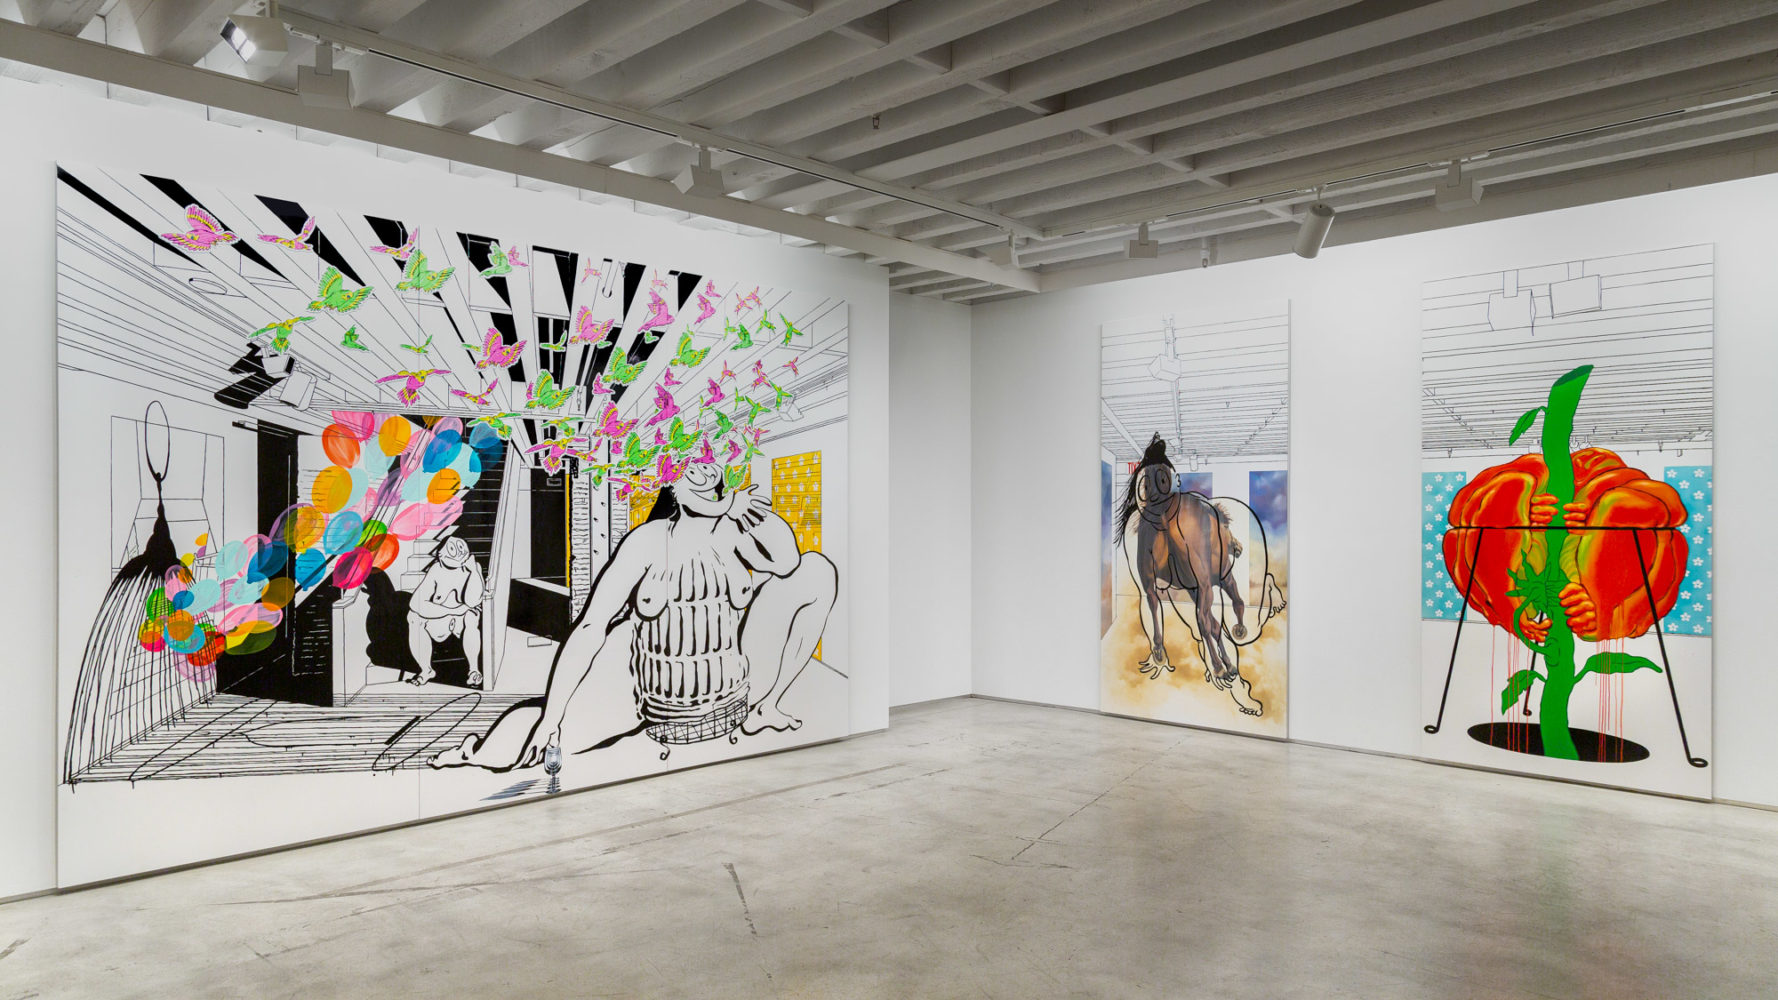 Installation view, "Ebecho Muslimova: Scenes in the Sublevel," photo by Daniel Terna, courtesy of The Drawing Center.